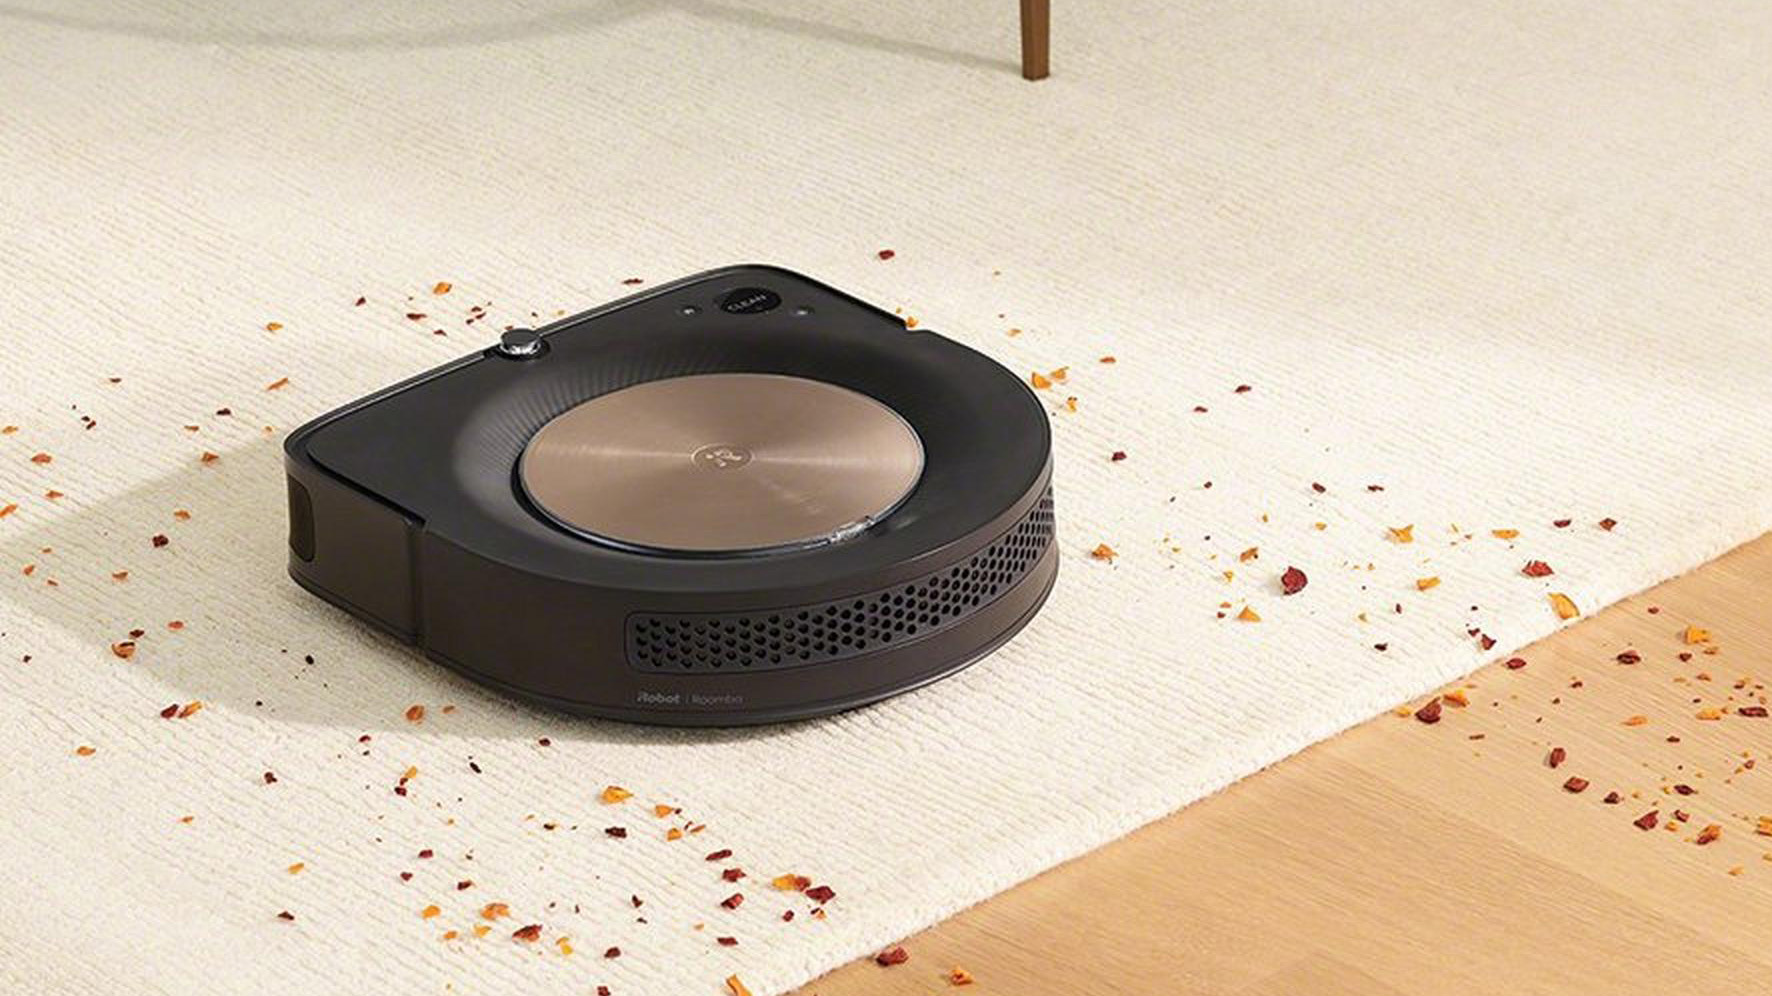 Best deals of the day Feb. 27: Roomba S9+ and Braava Jet m6 bundle,   smart home devices, and more